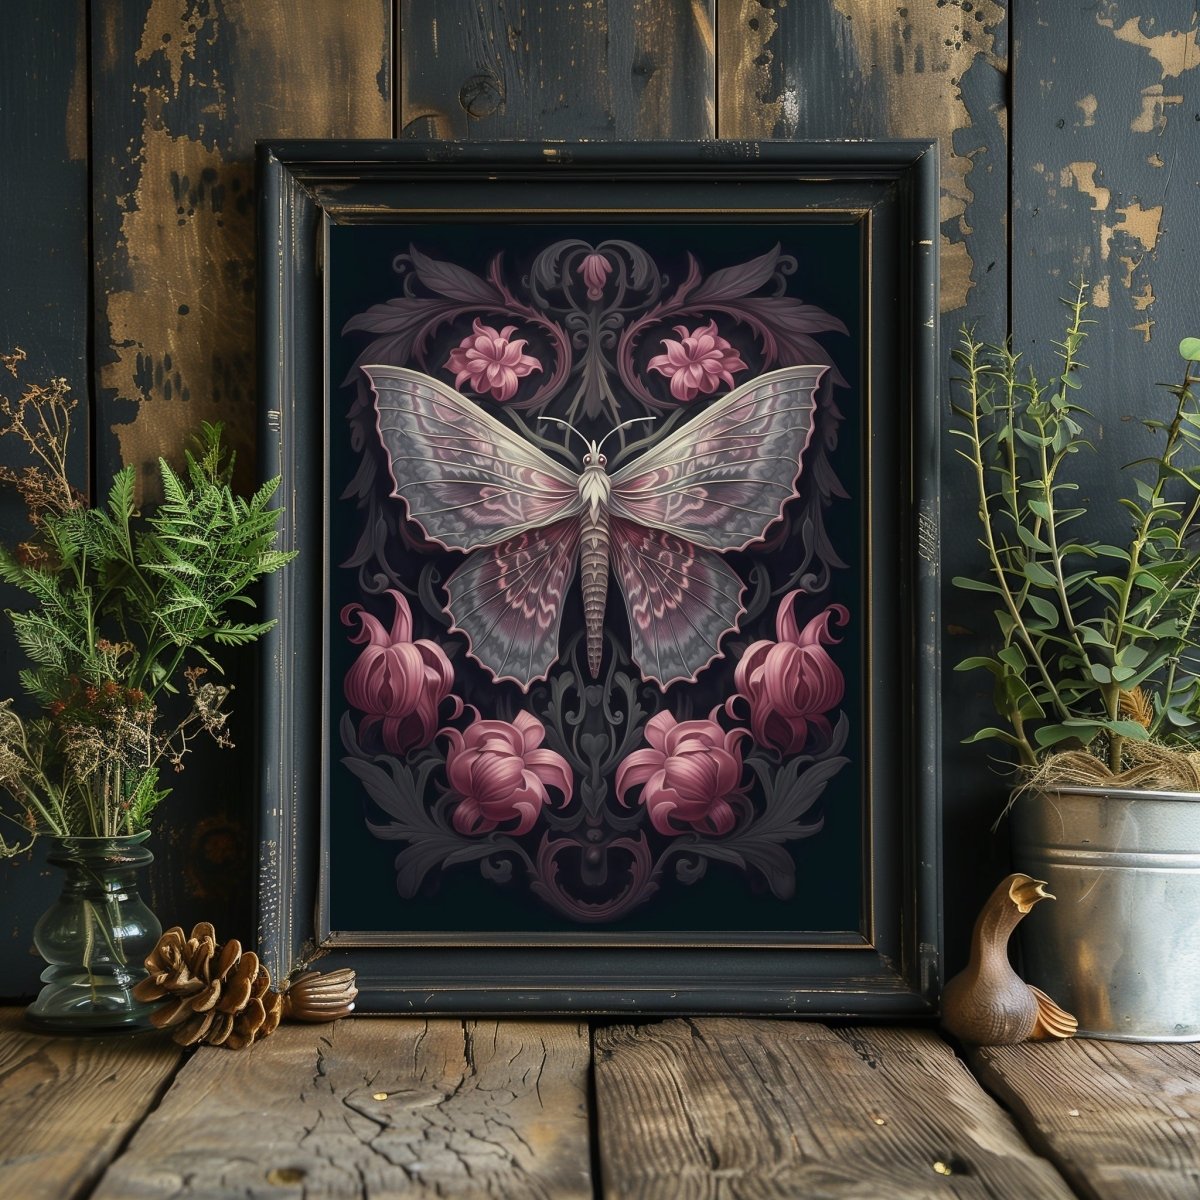 Dark Moth Paper Gothic Wall Art Poster Prints Witchy Gothic Botanical Decor Dark Academia Goblincore Goth Home Decor Moody Painting Library Decor Antique - Everything Pixel